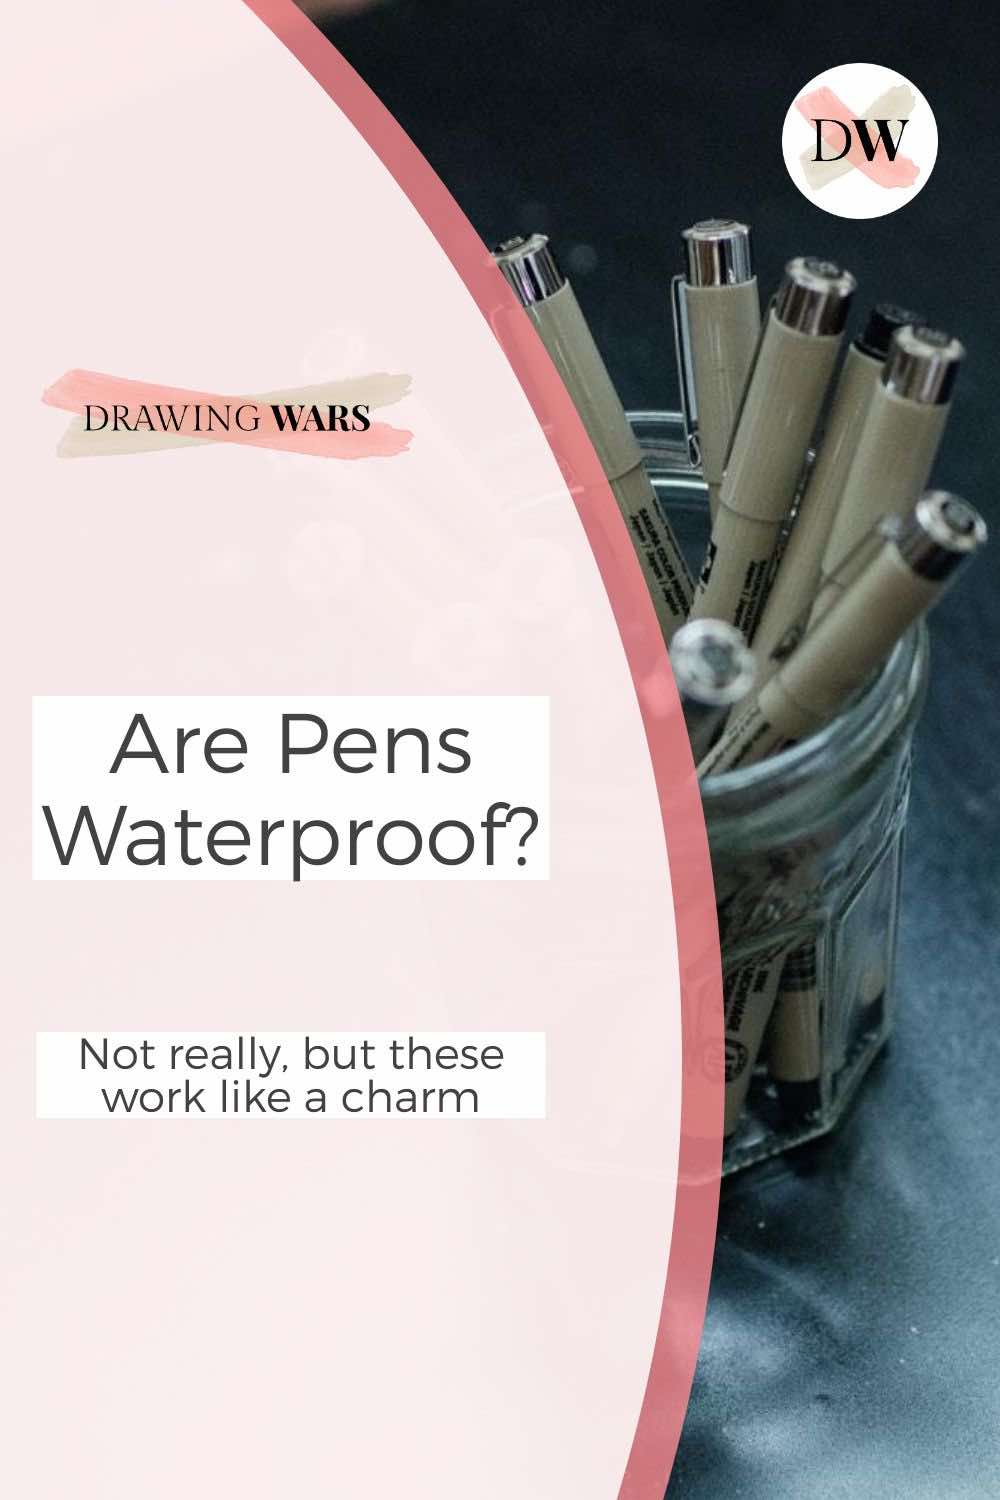 Are Pens Waterproof? Not really, but these work like a charm Thumbnail